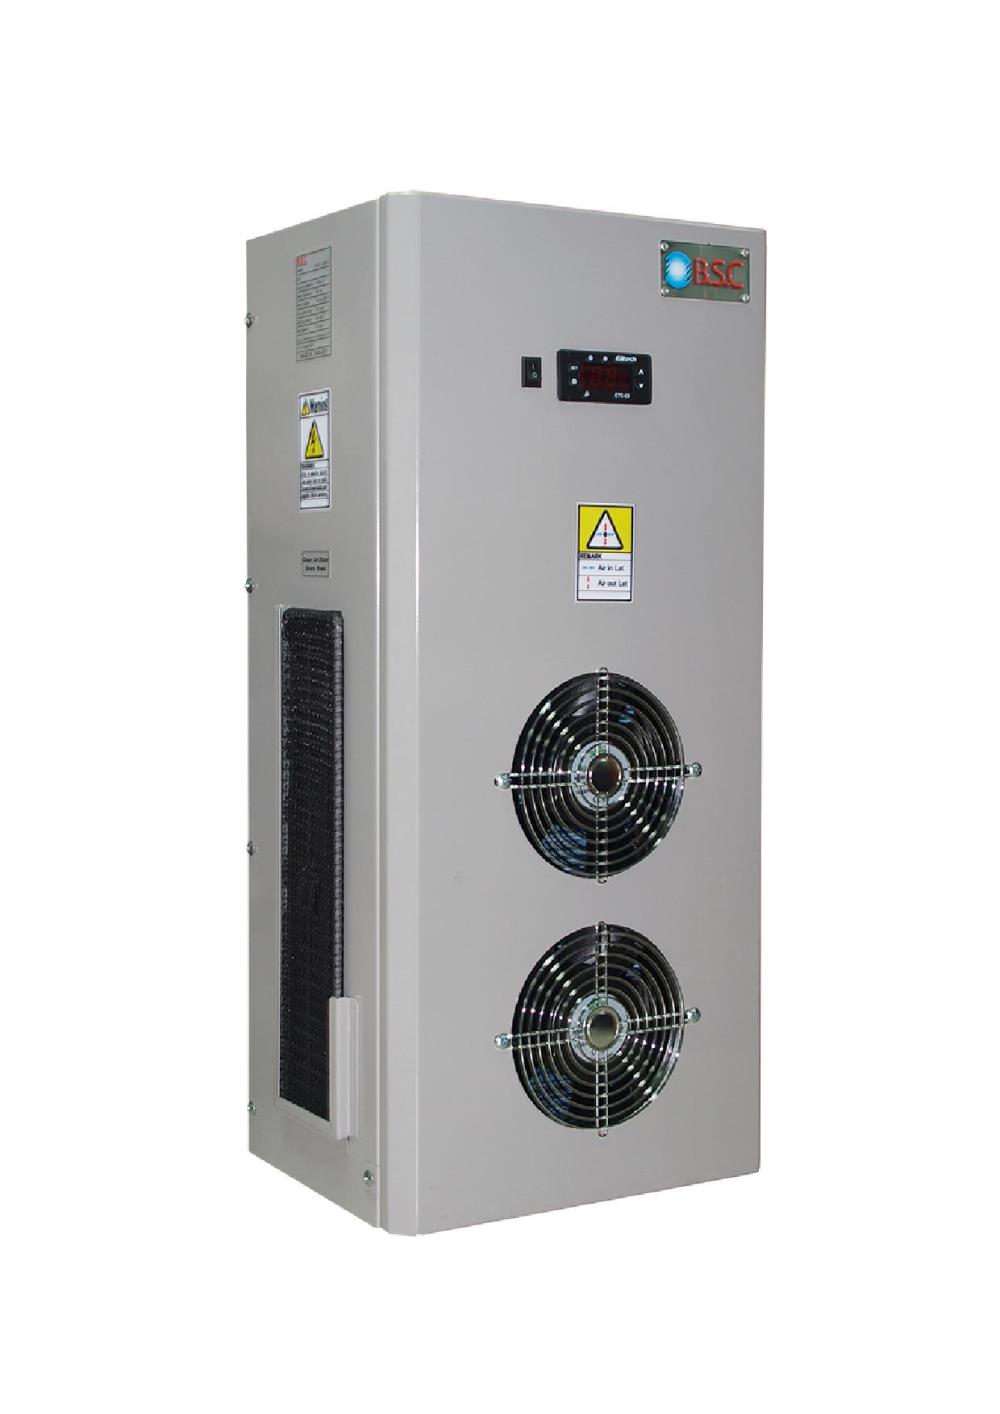 Air Condition : BSC1250-C,แอร์ตู้คอนโทรล,BSC,Plant and Facility Equipment/HVAC/Air Conditioning